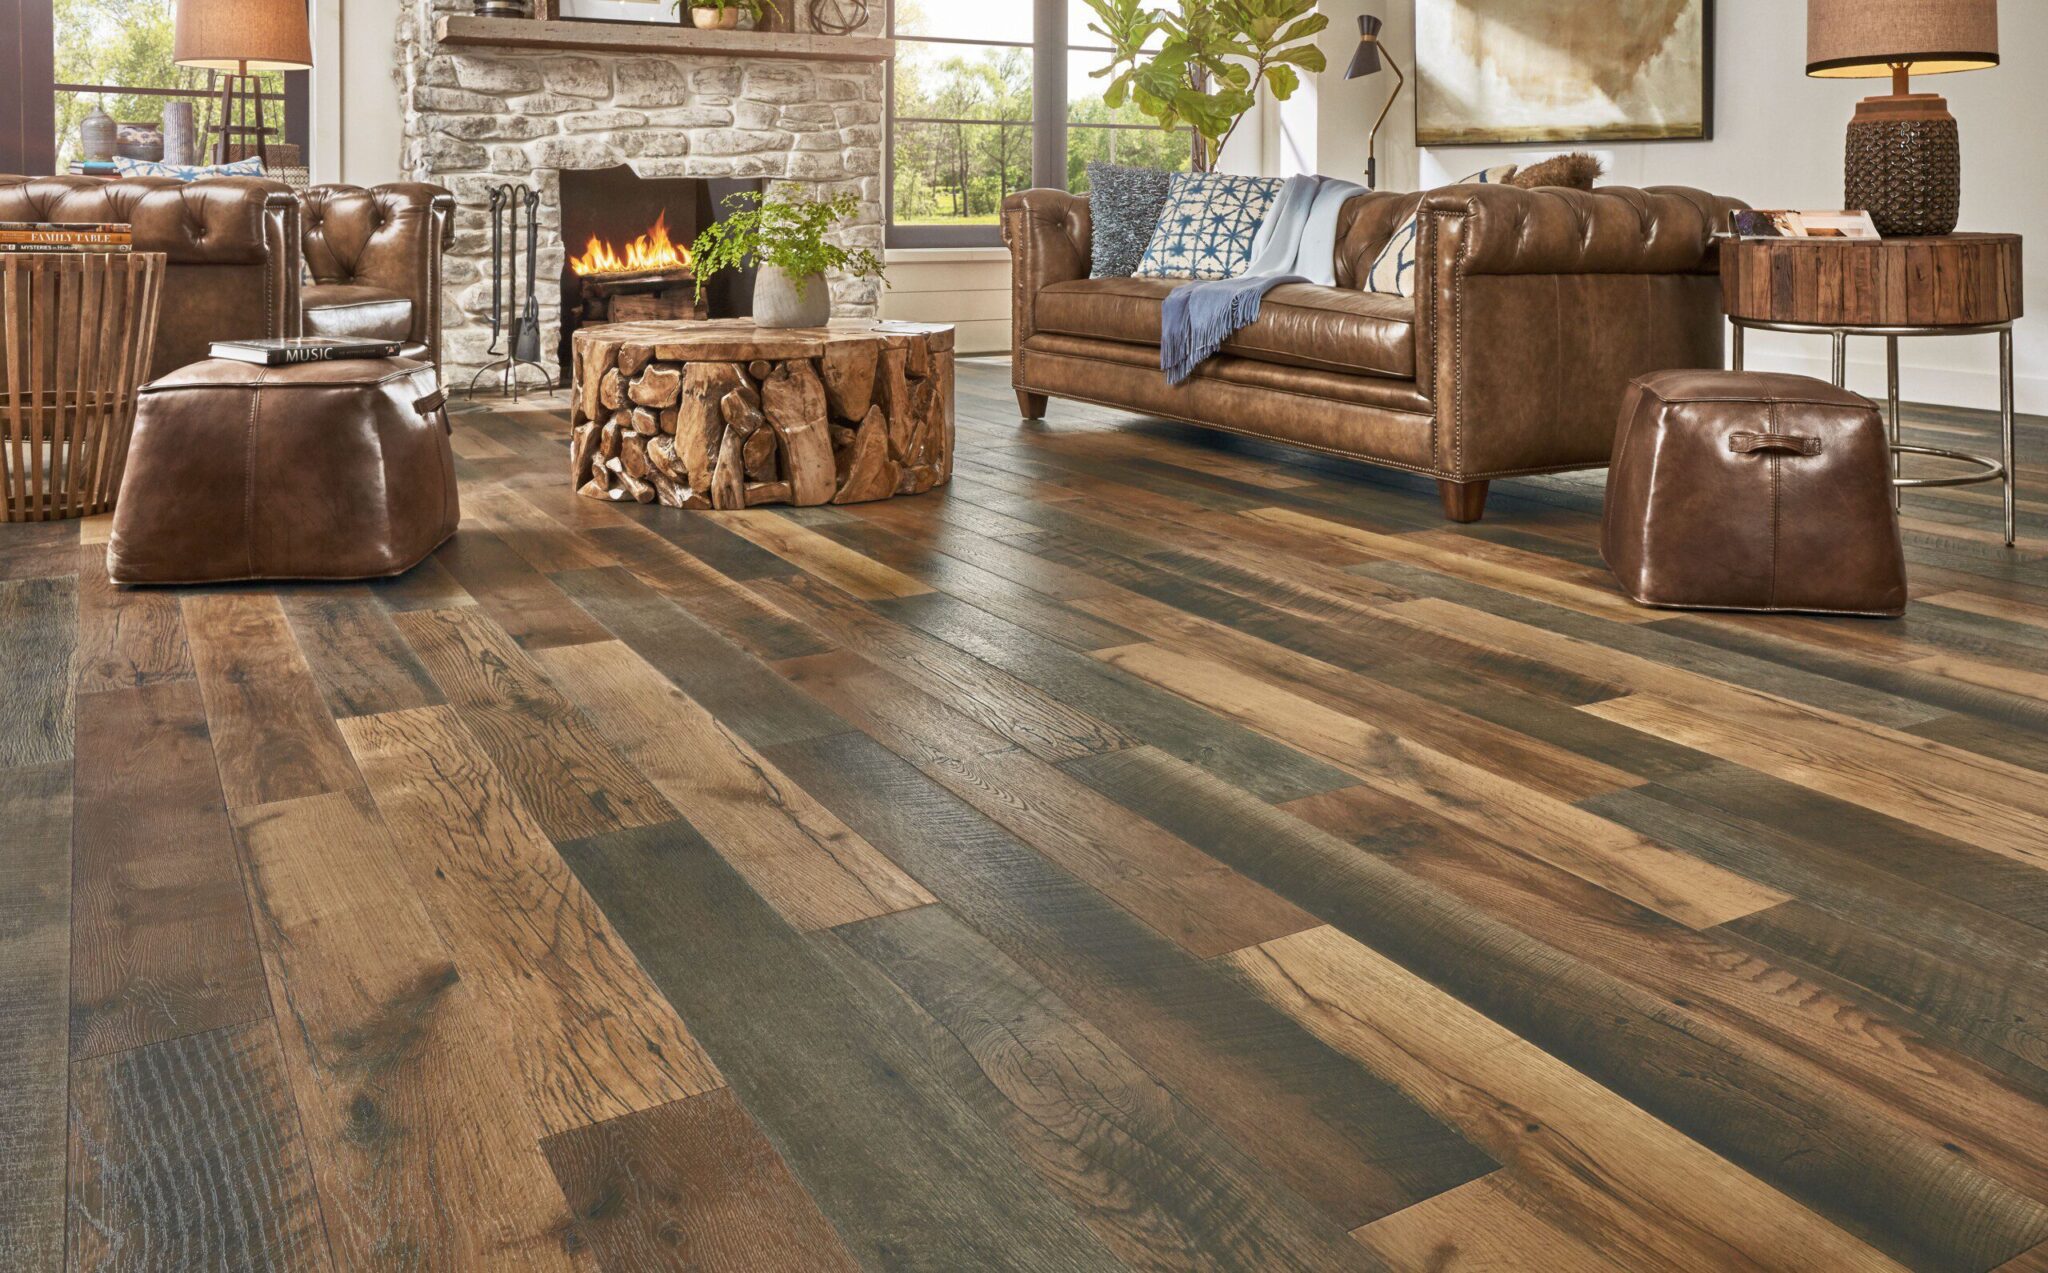 About Laminate Flooring – Let’s Discover Your Options - Michigan's Top ...